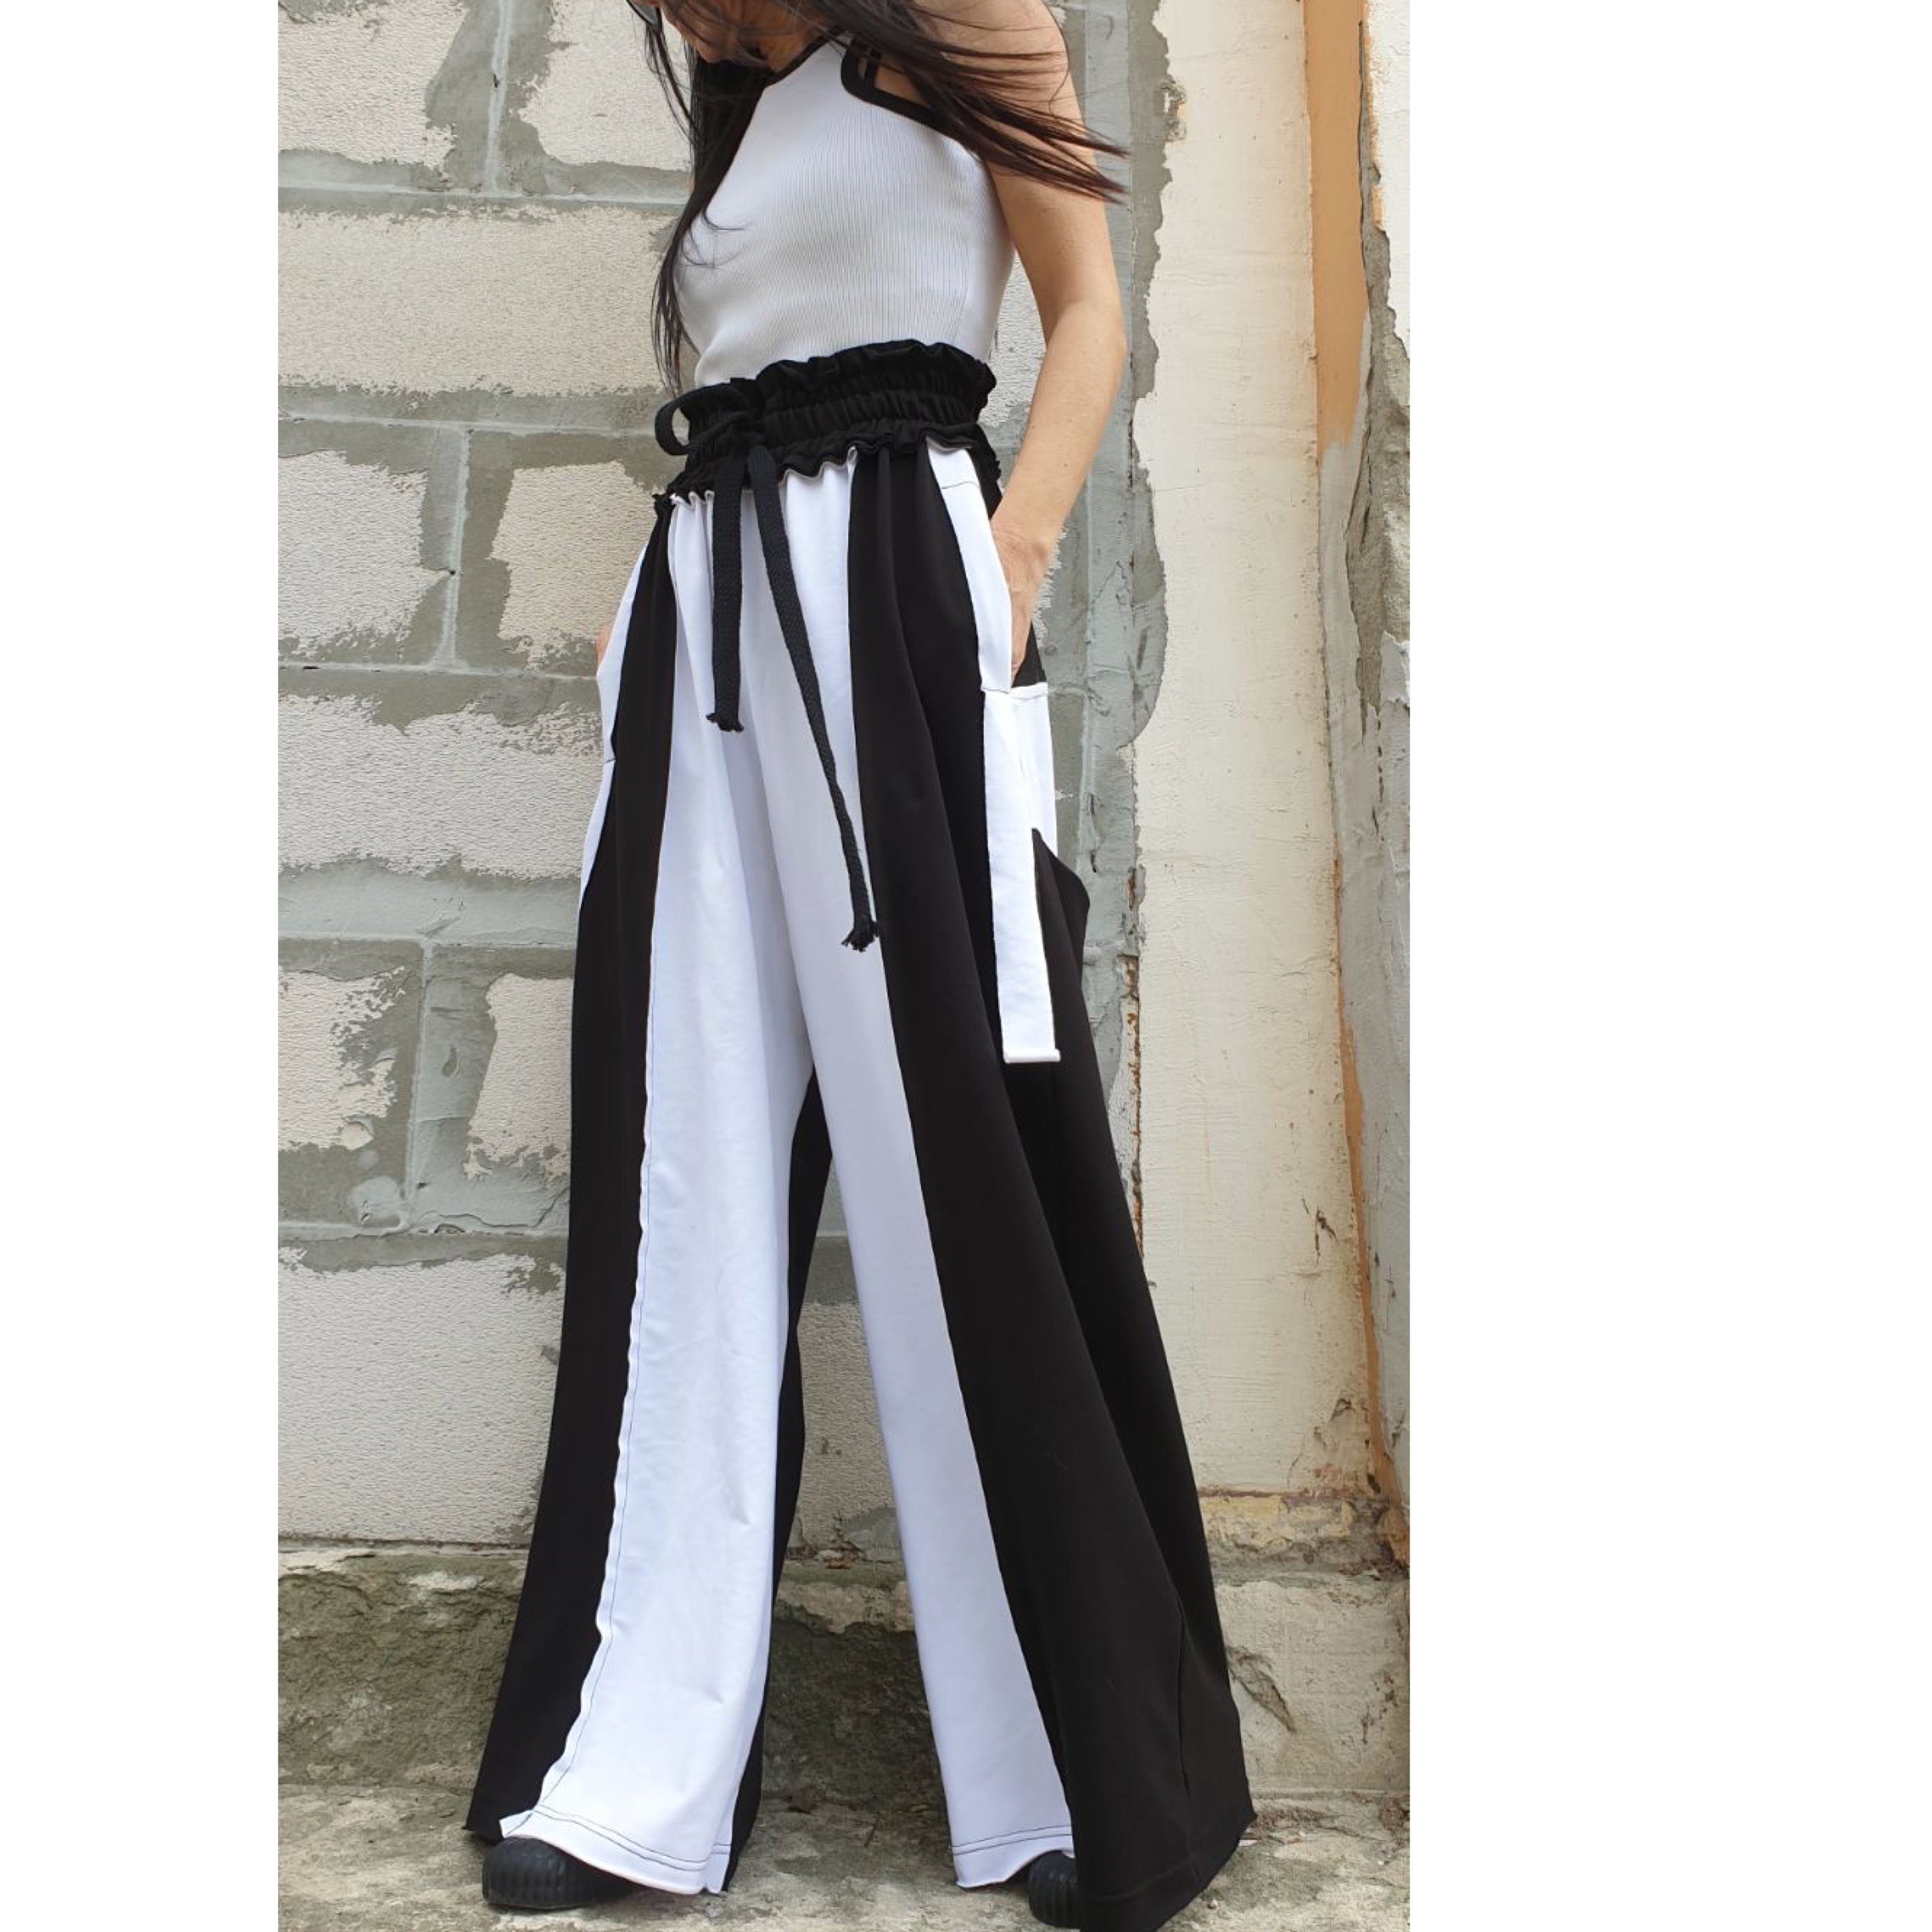 Everyday Wide Leg Woman Trousers/casual Comfortable Pants/loose Long Cotton  Trousers/high Waist Extravagant Pants/urban Woman Trousers -  New  Zealand